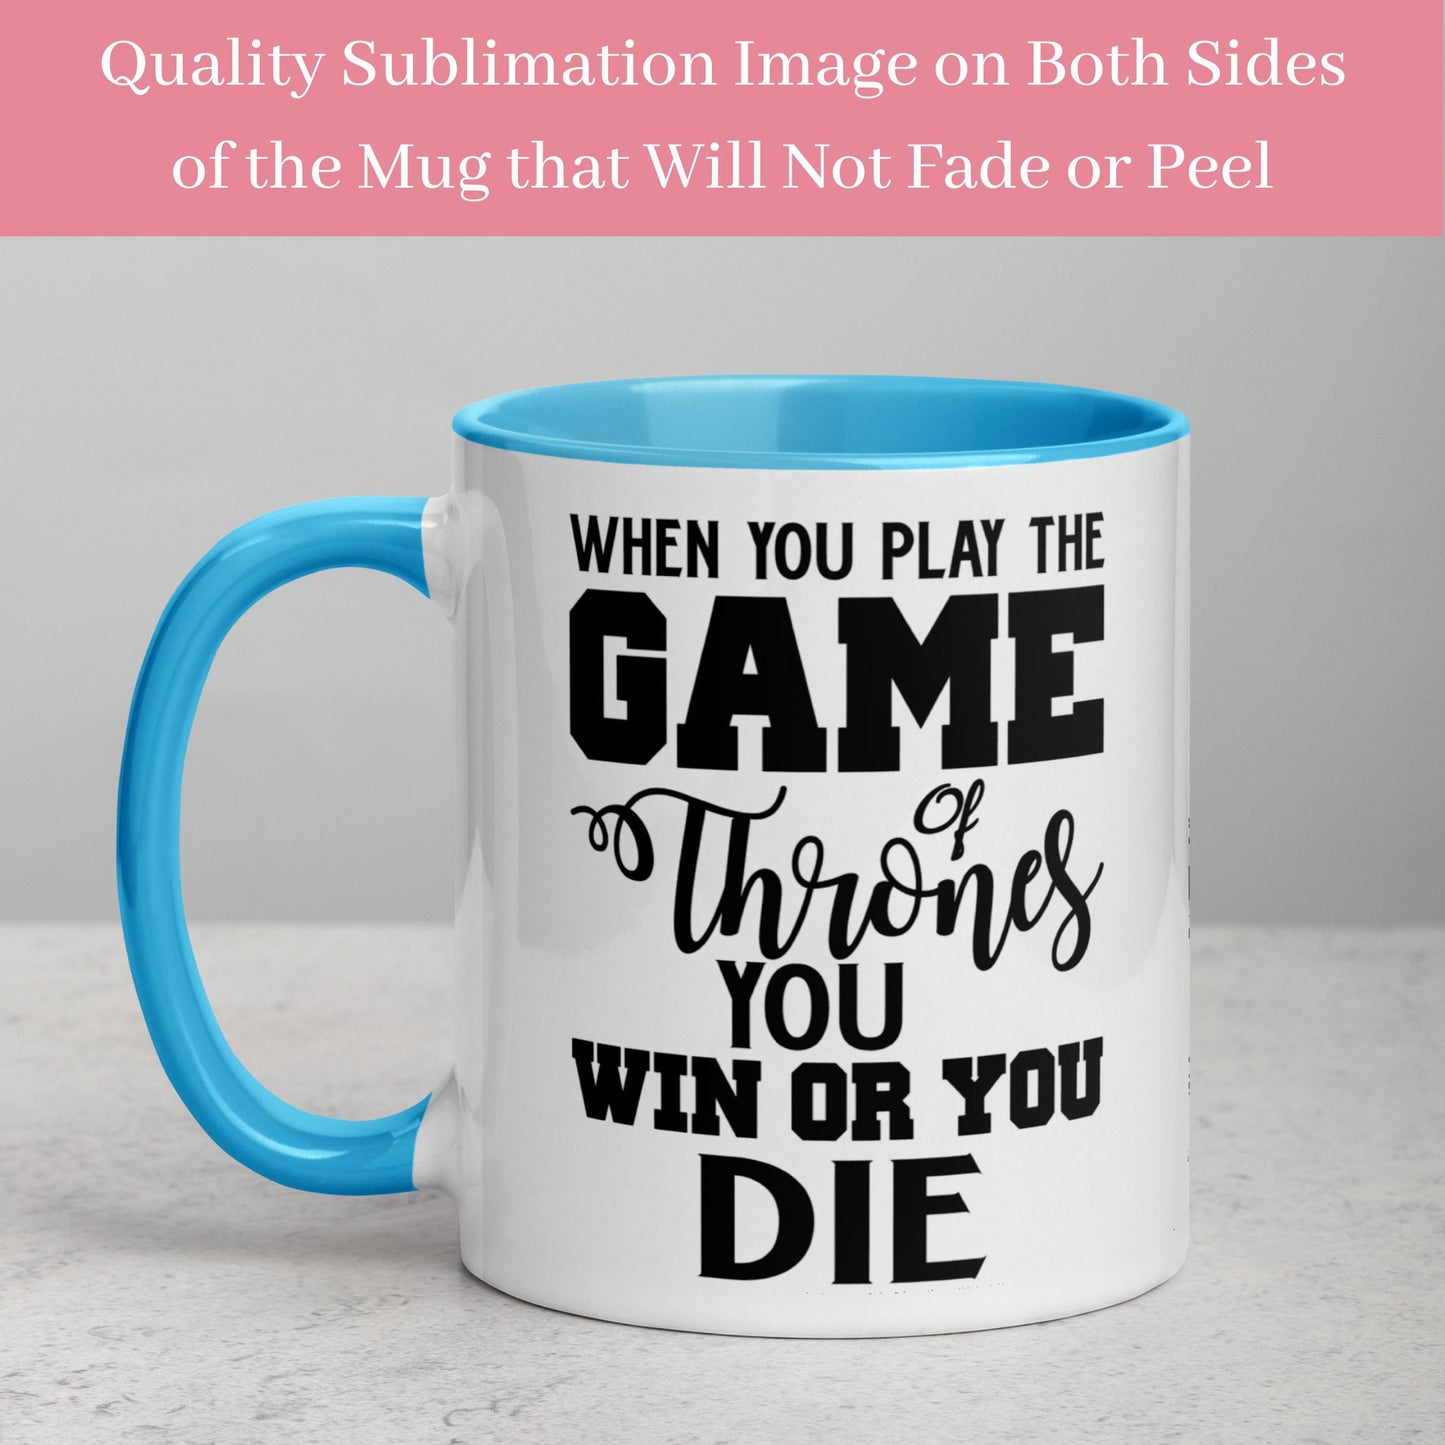 Game of Thrones Mug, When You Play The Game Of Thrones You Win Or You Die Mug, Funny Coffee Cup, GoT Mugs, Birthday Gift, GoT Gift, 398